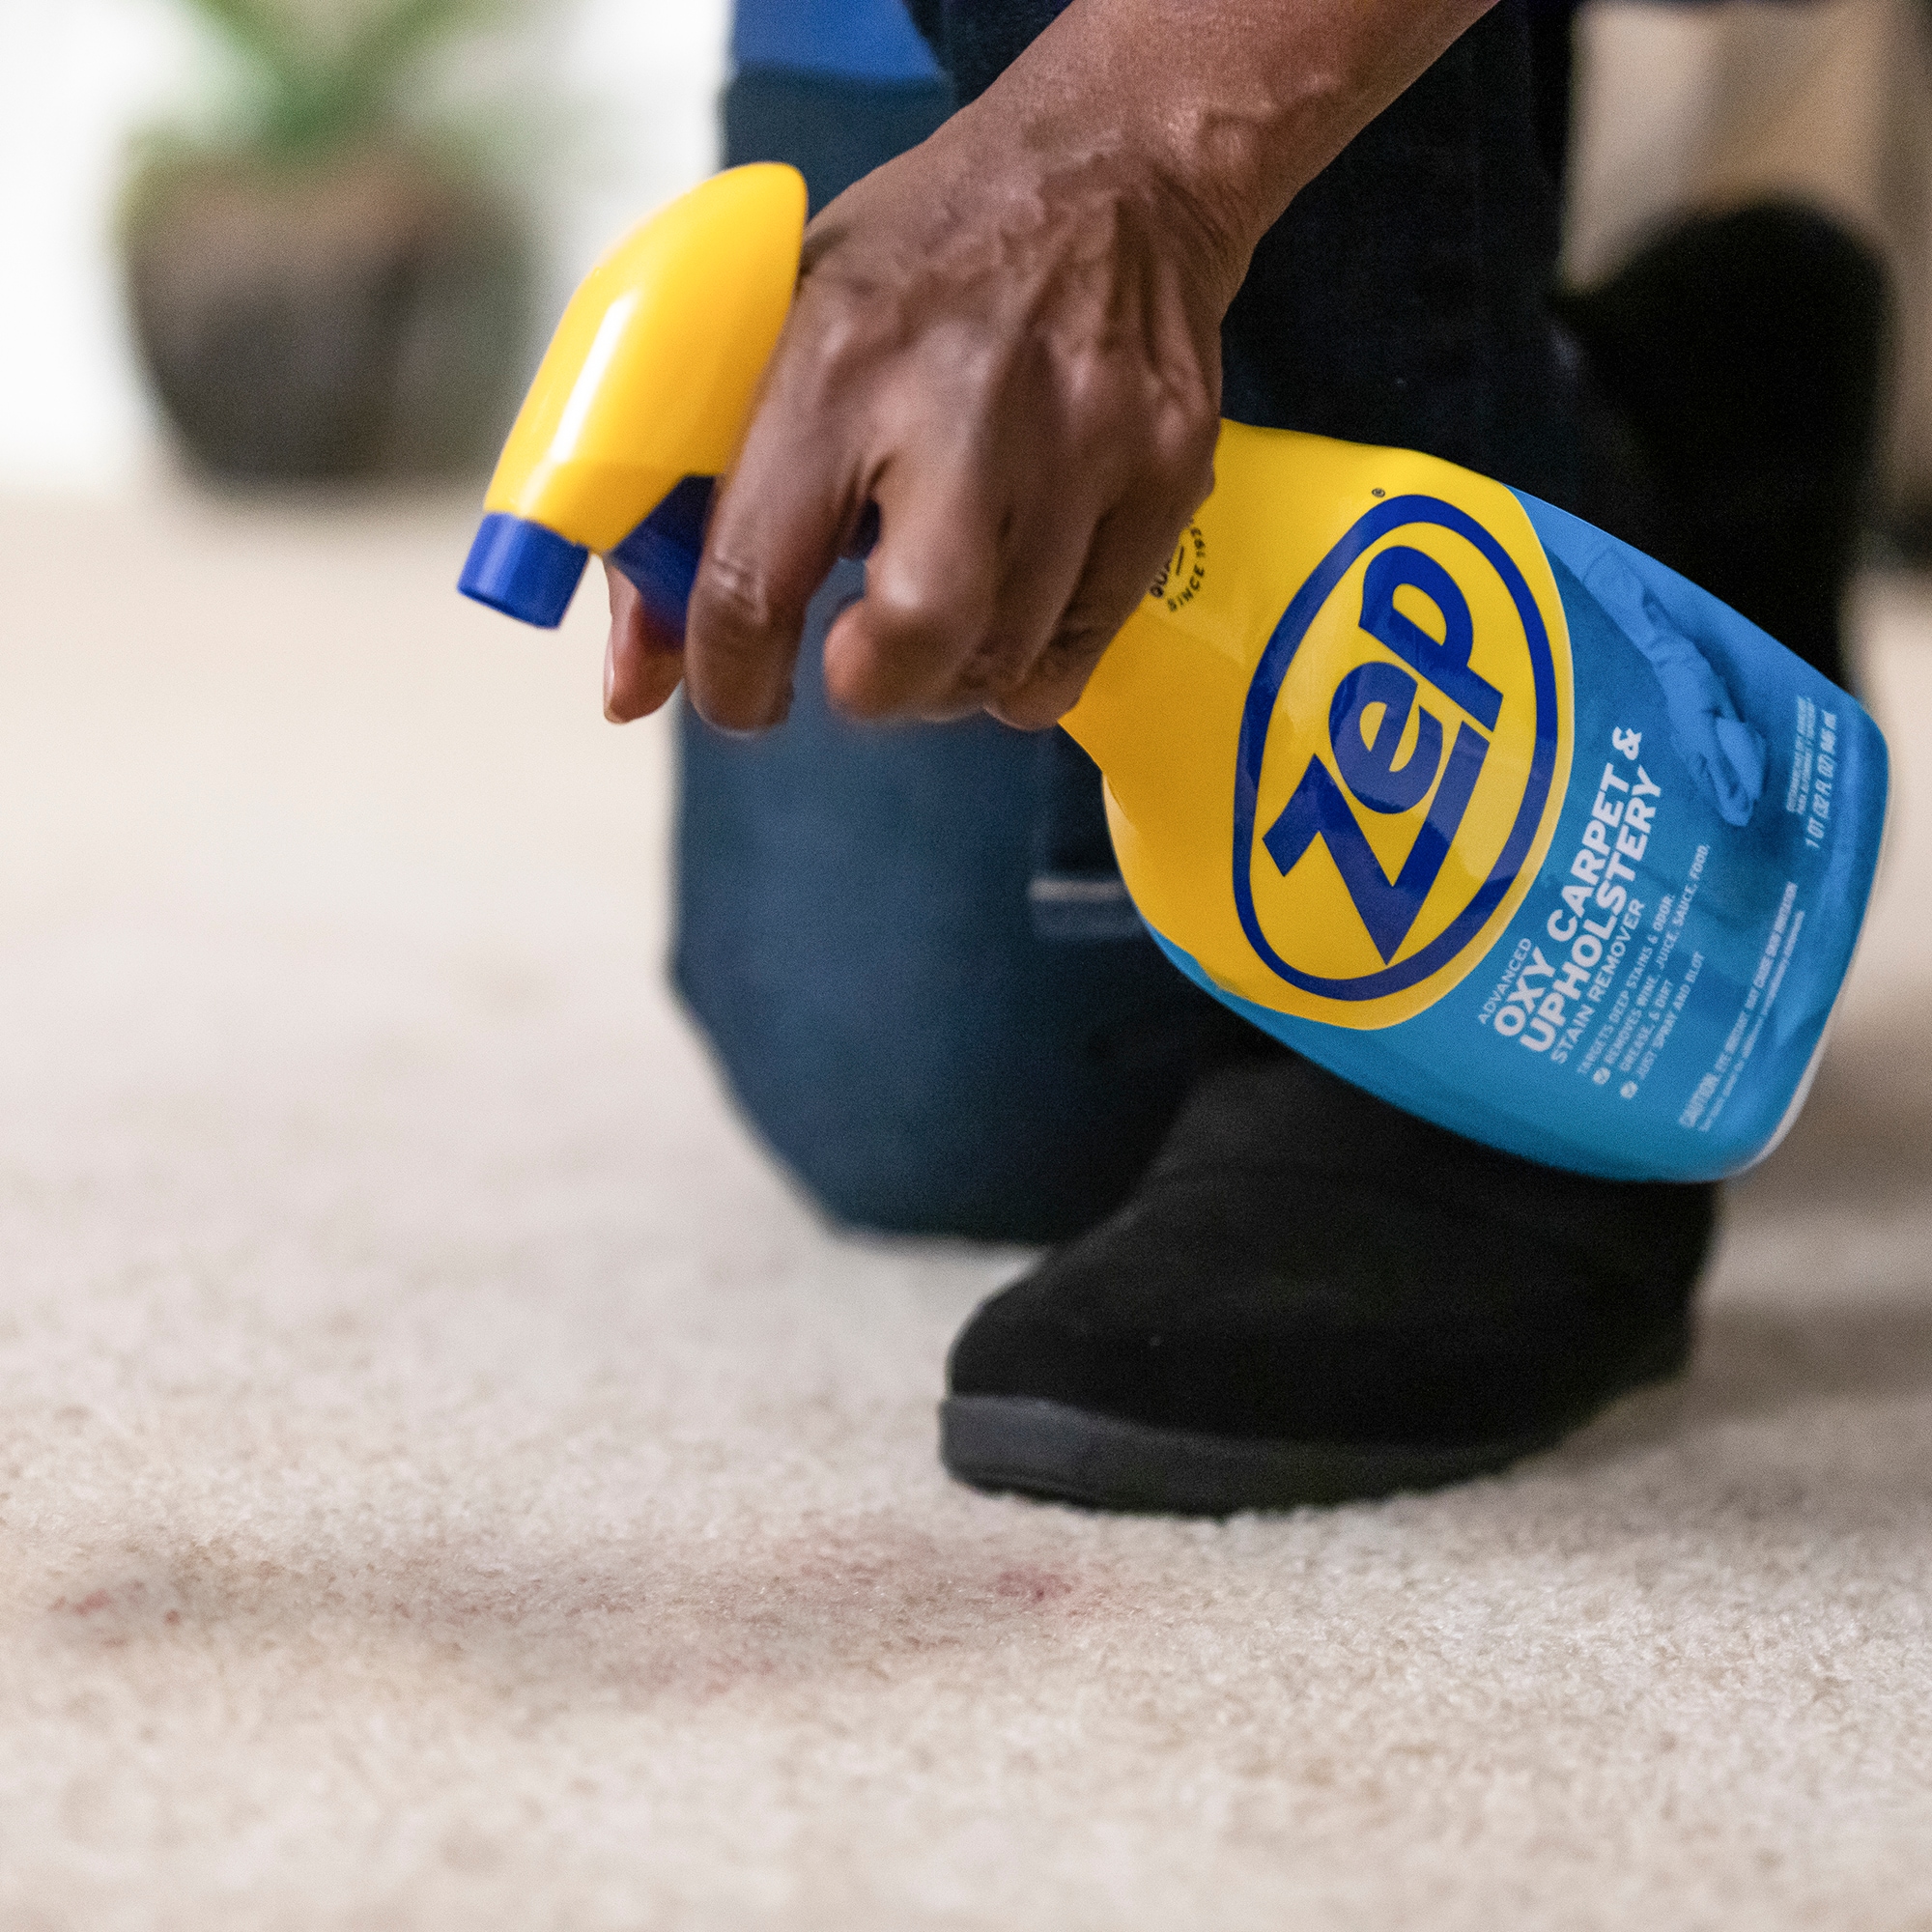 Best Carpet Stain Remover 2019 - Spot Shot Review